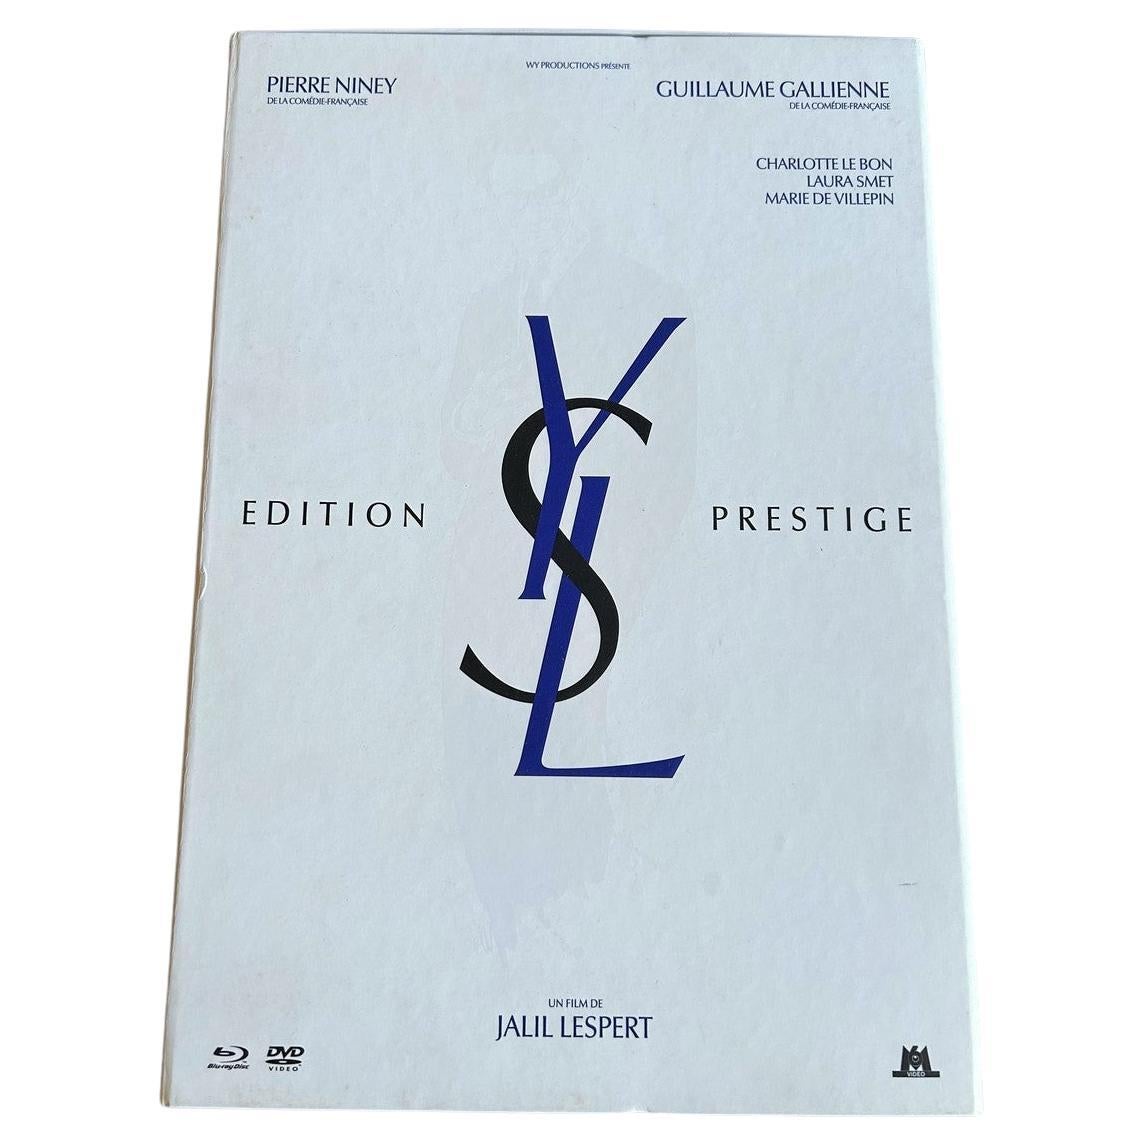 May 2014

France

A Prestige Edition box set to mark the release of the film Yves Saint Laurent by Jalil Lespert starring Pierre Niney and Guillaume Gallien, May 2014. Including the DVD of the film, a sketch from the 1976 Opéras Ballets Russes